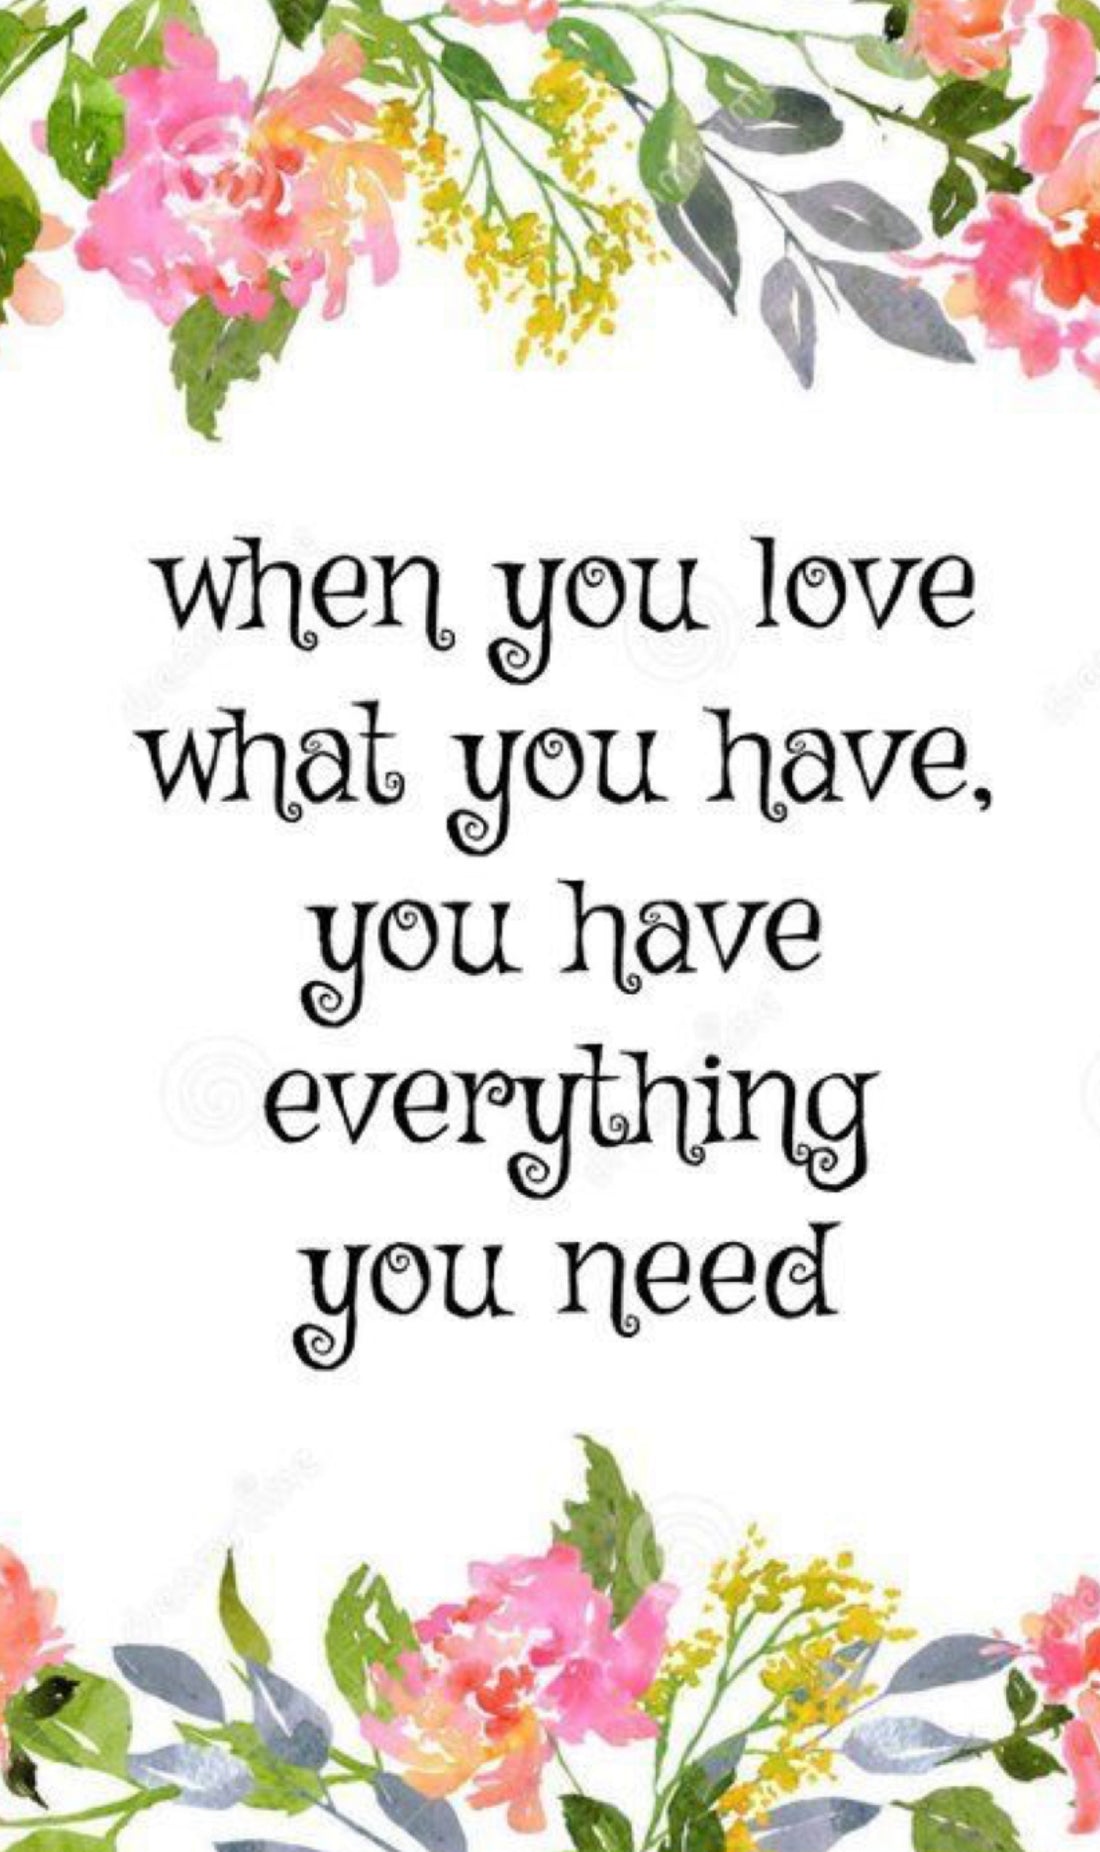 When you love what you have, you have everything you need.